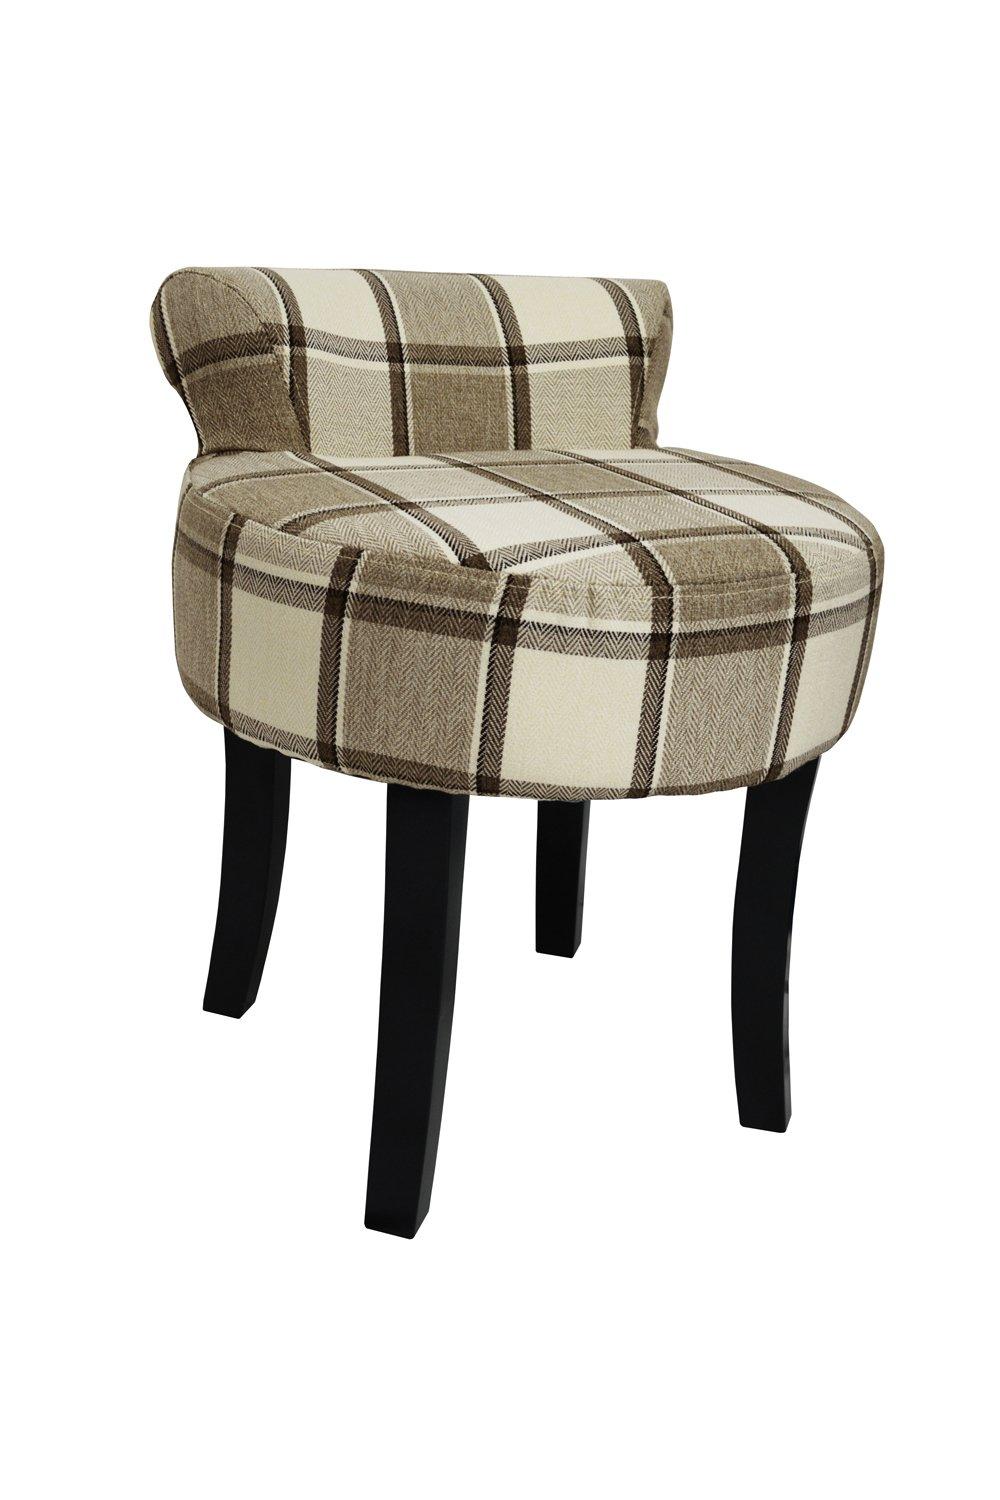 Low Back Chair  Padded Stool With Wood Legs - Mink Check